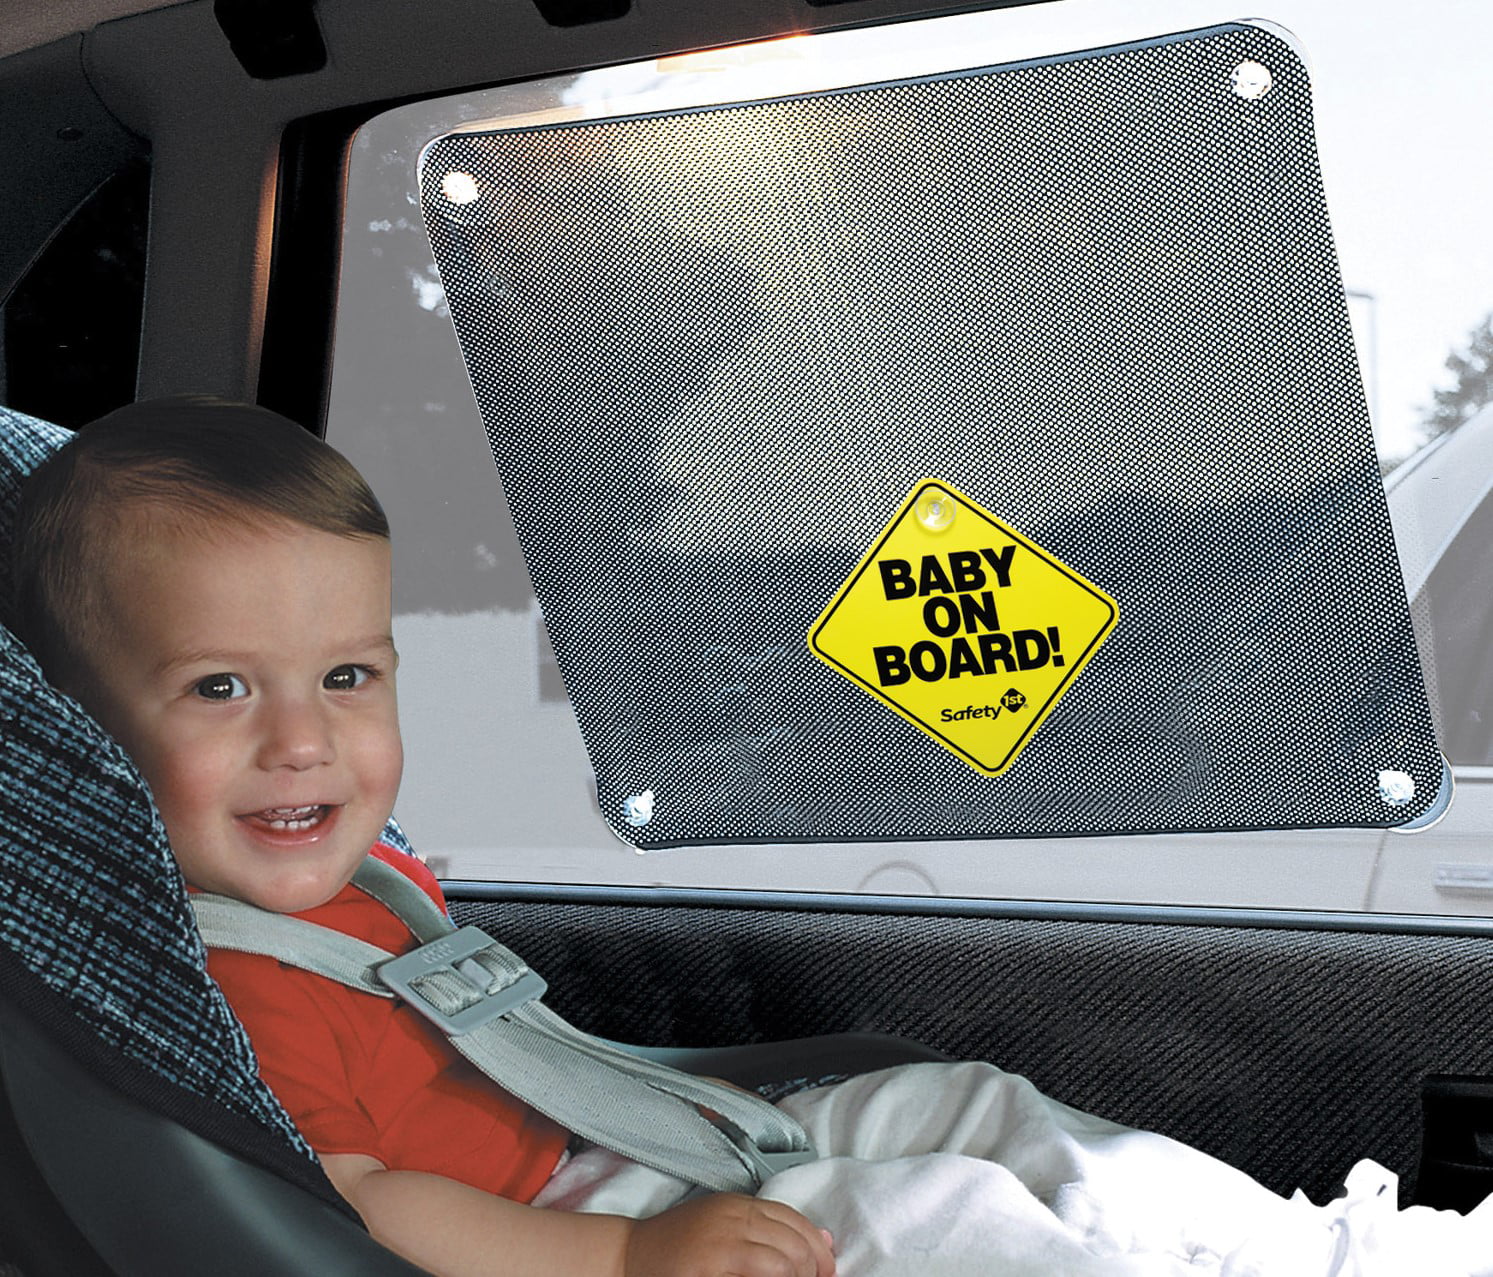 Safety First Baby On Board